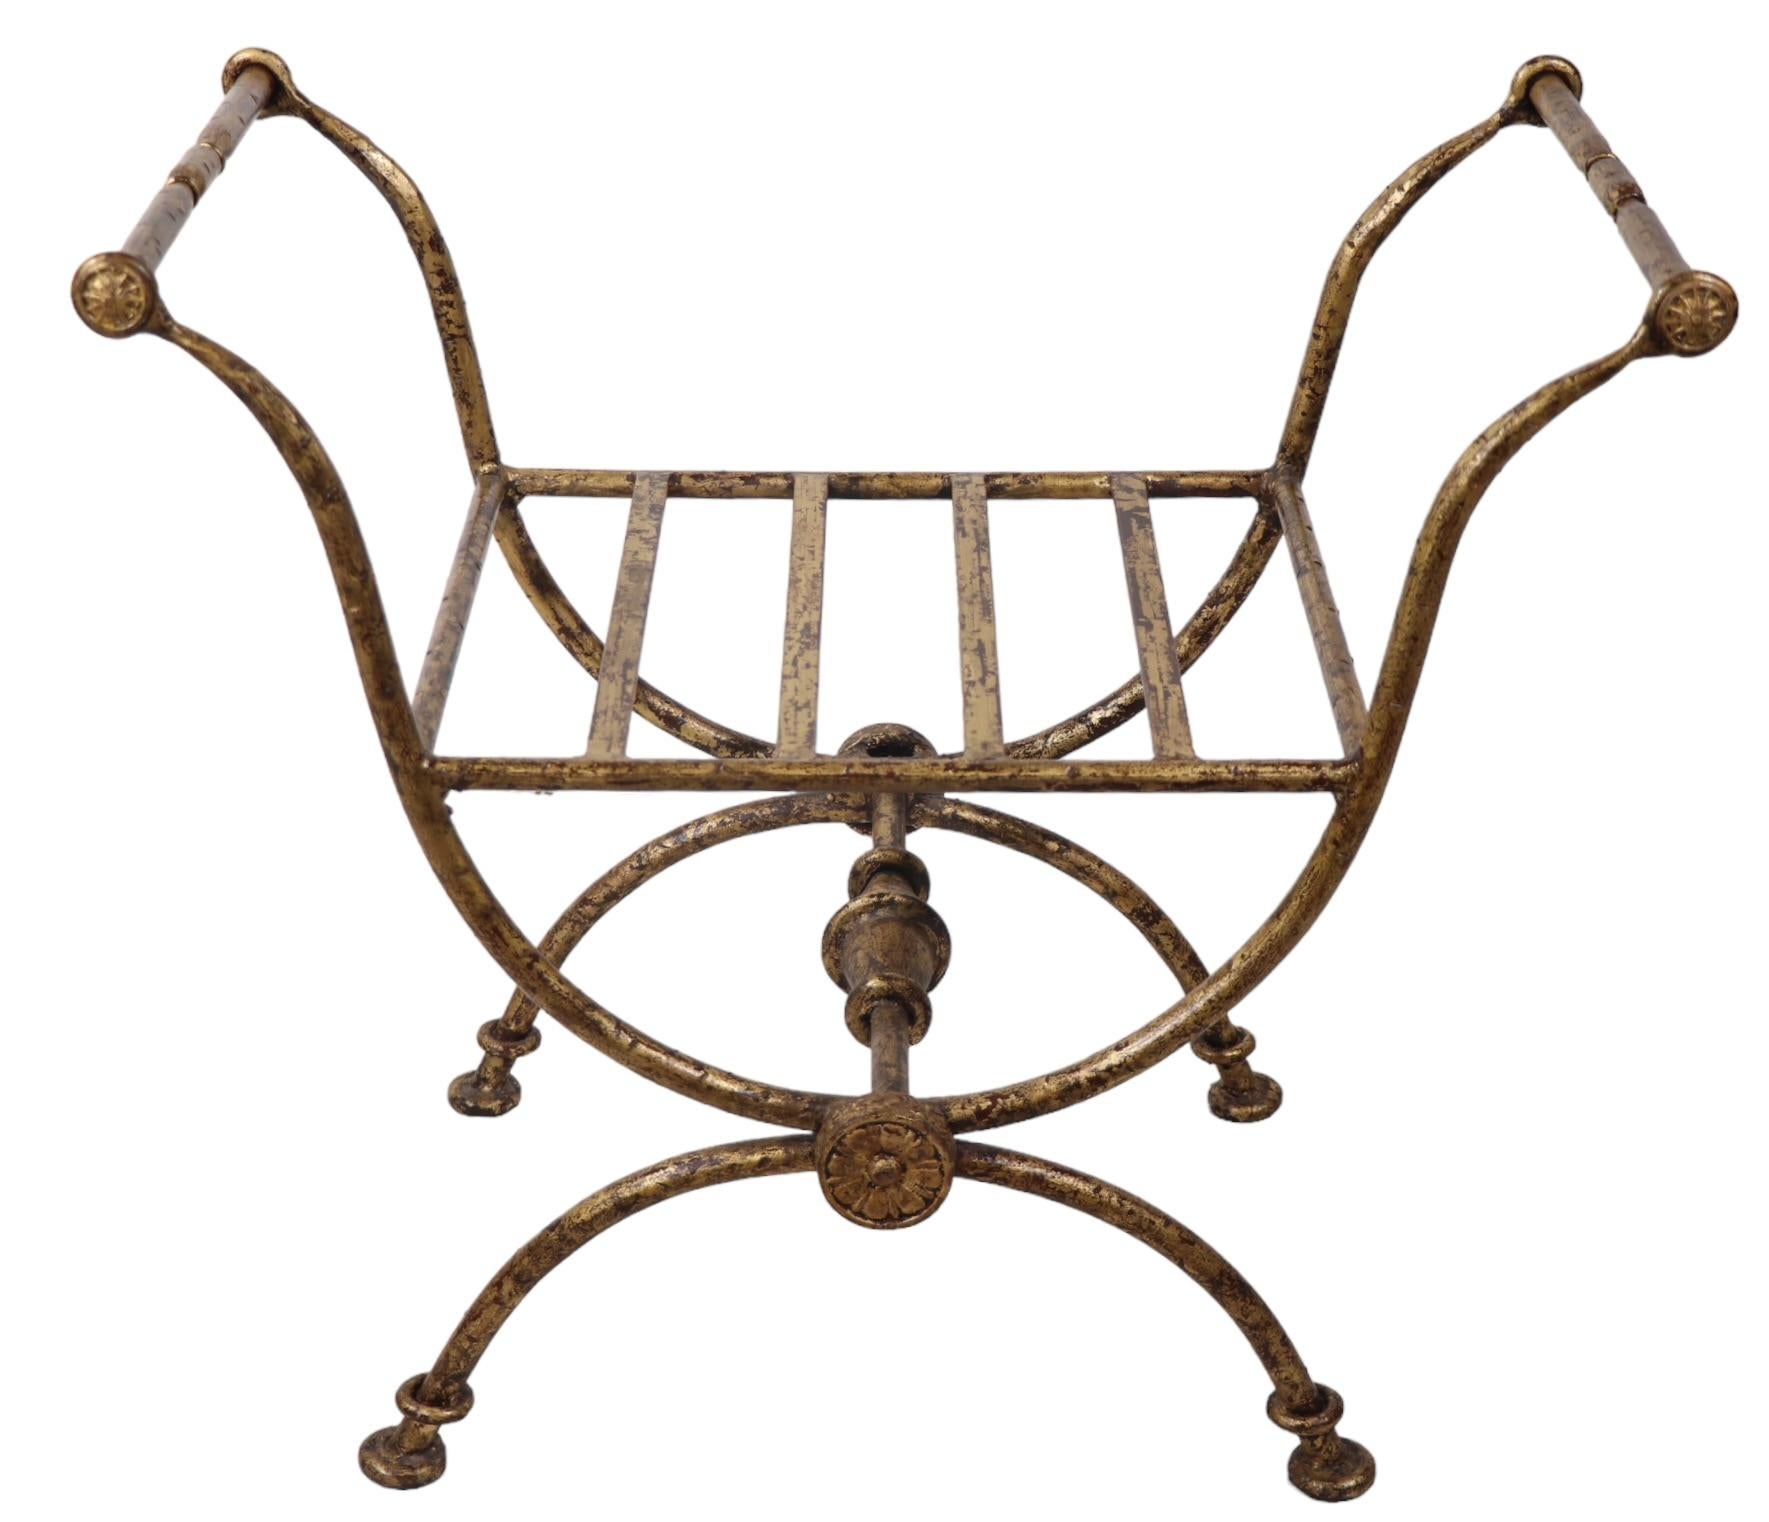 Hollywood Regency Wrought Iron Vanity Widow Bench in Faux Gilt Finish c 1940/1960's  For Sale